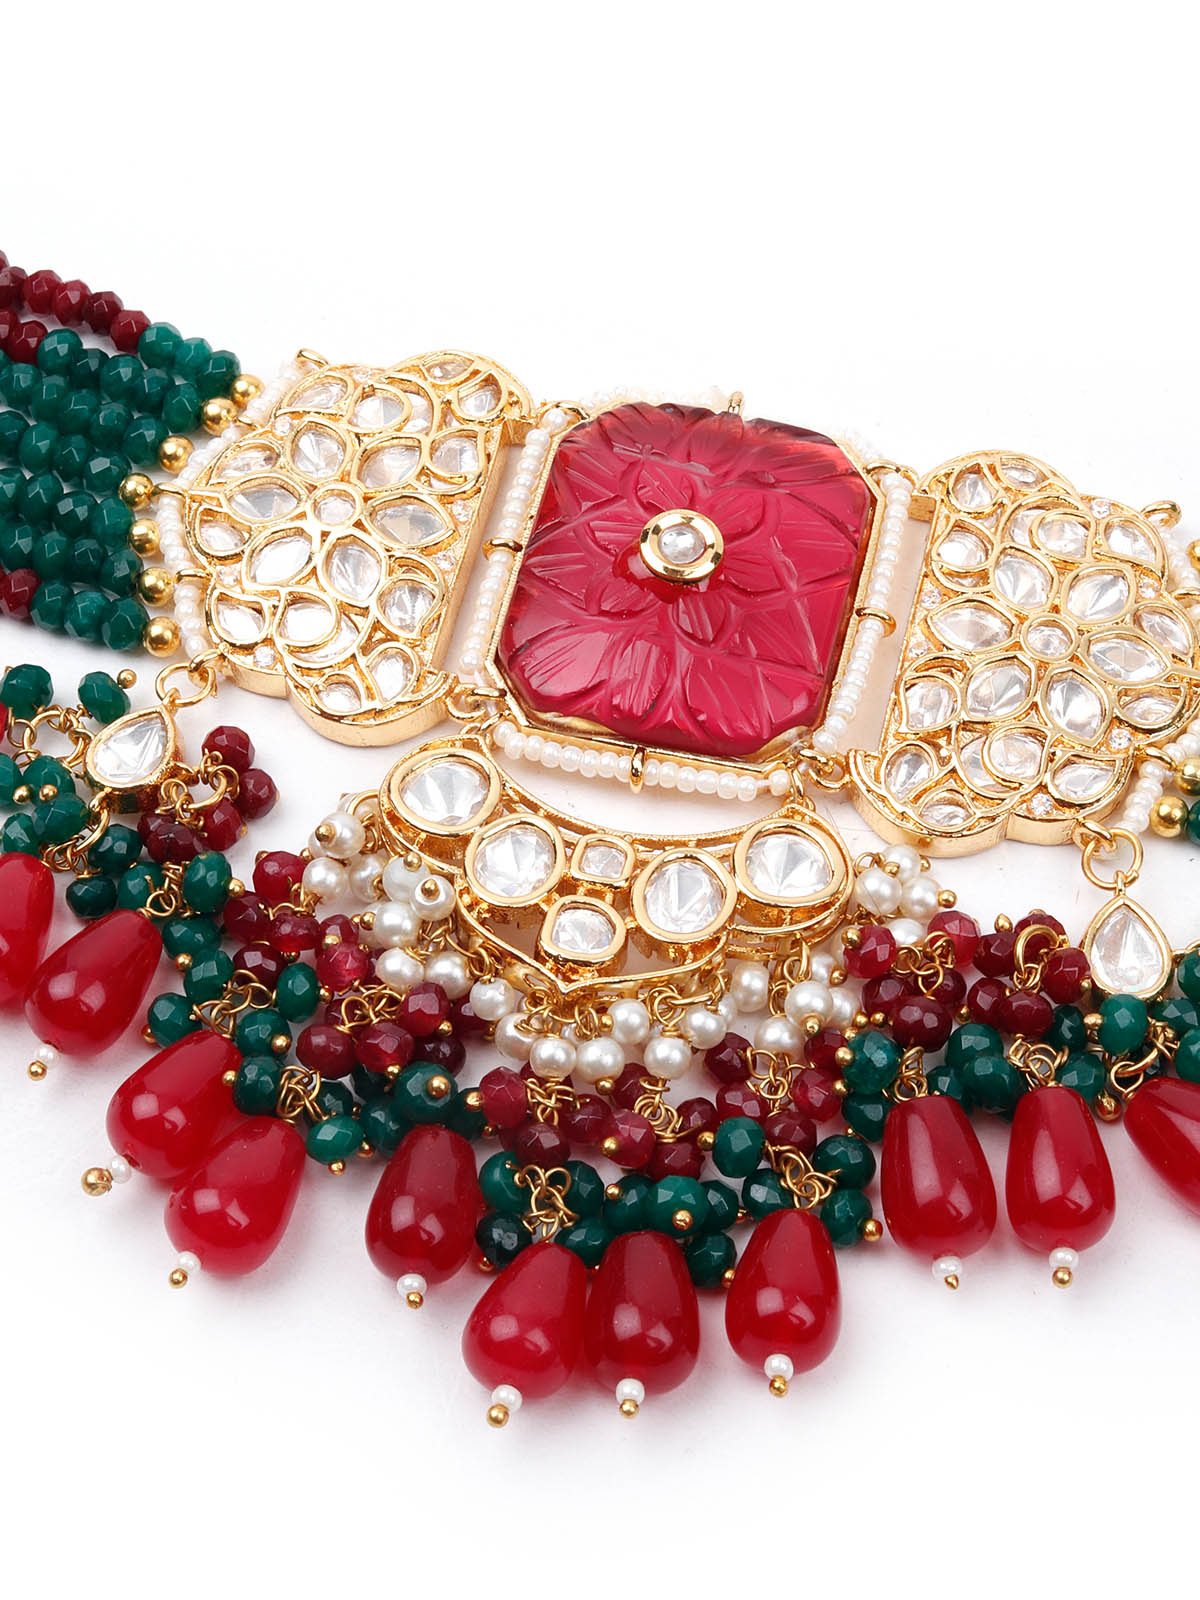 Odette Women Green And Red Choker Necklace Set